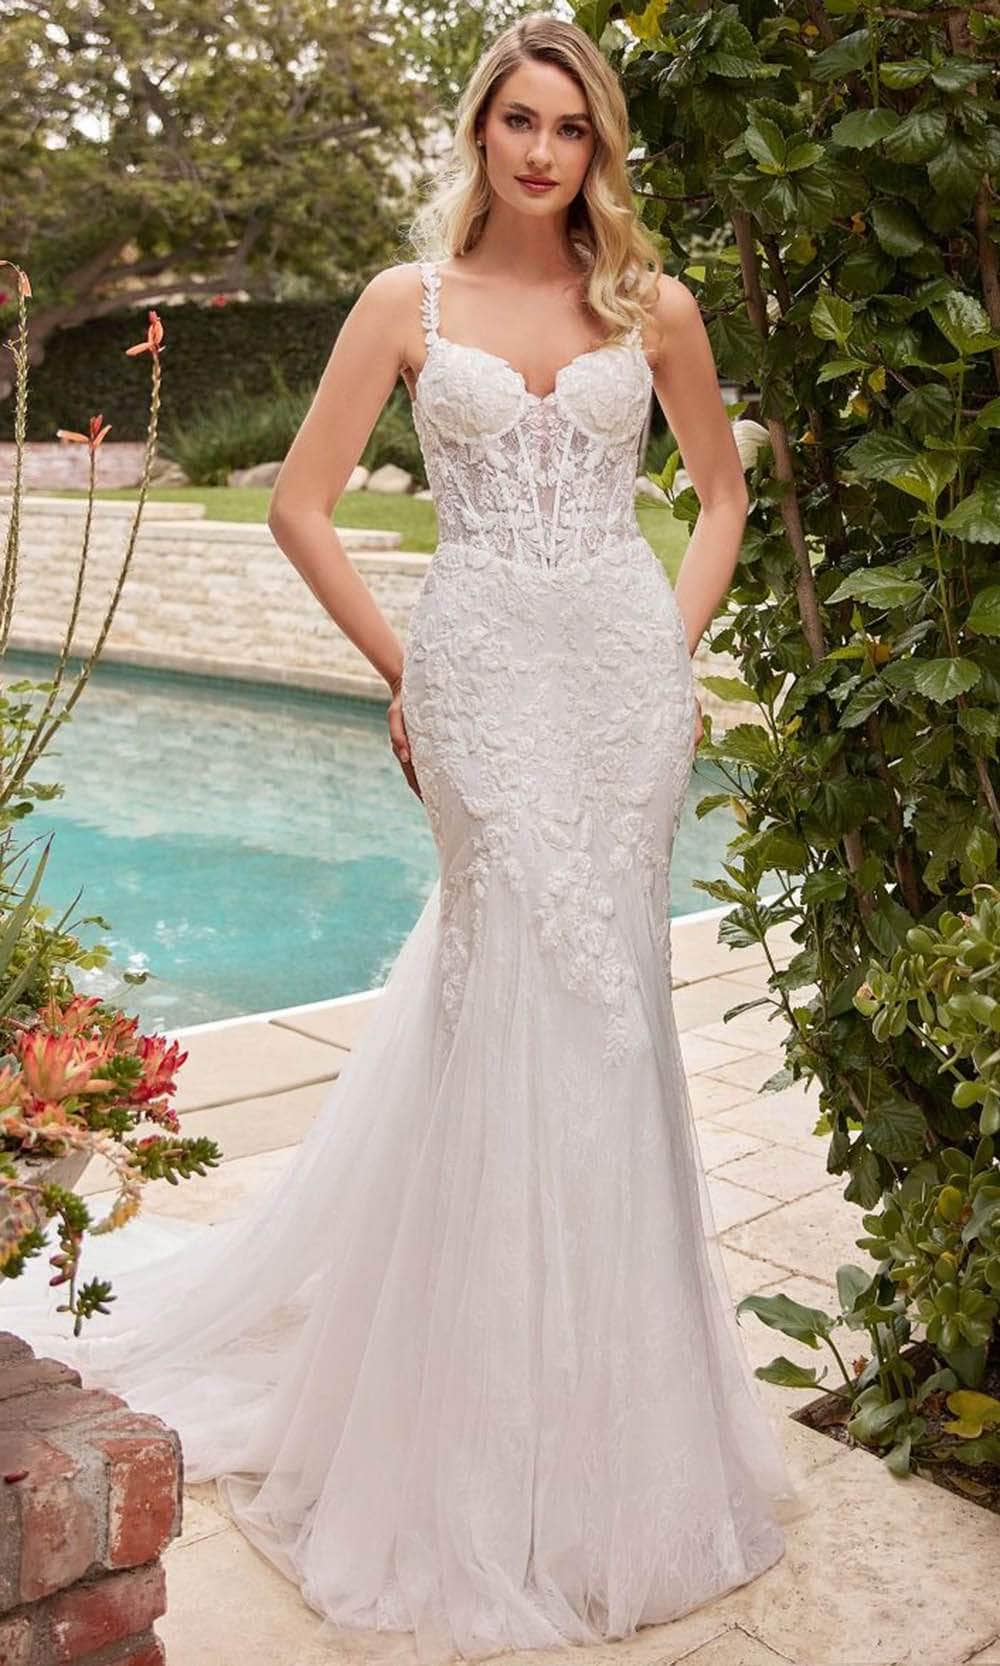 Ladivine CDS432W - Lace Sleeveless Bridal Gown
